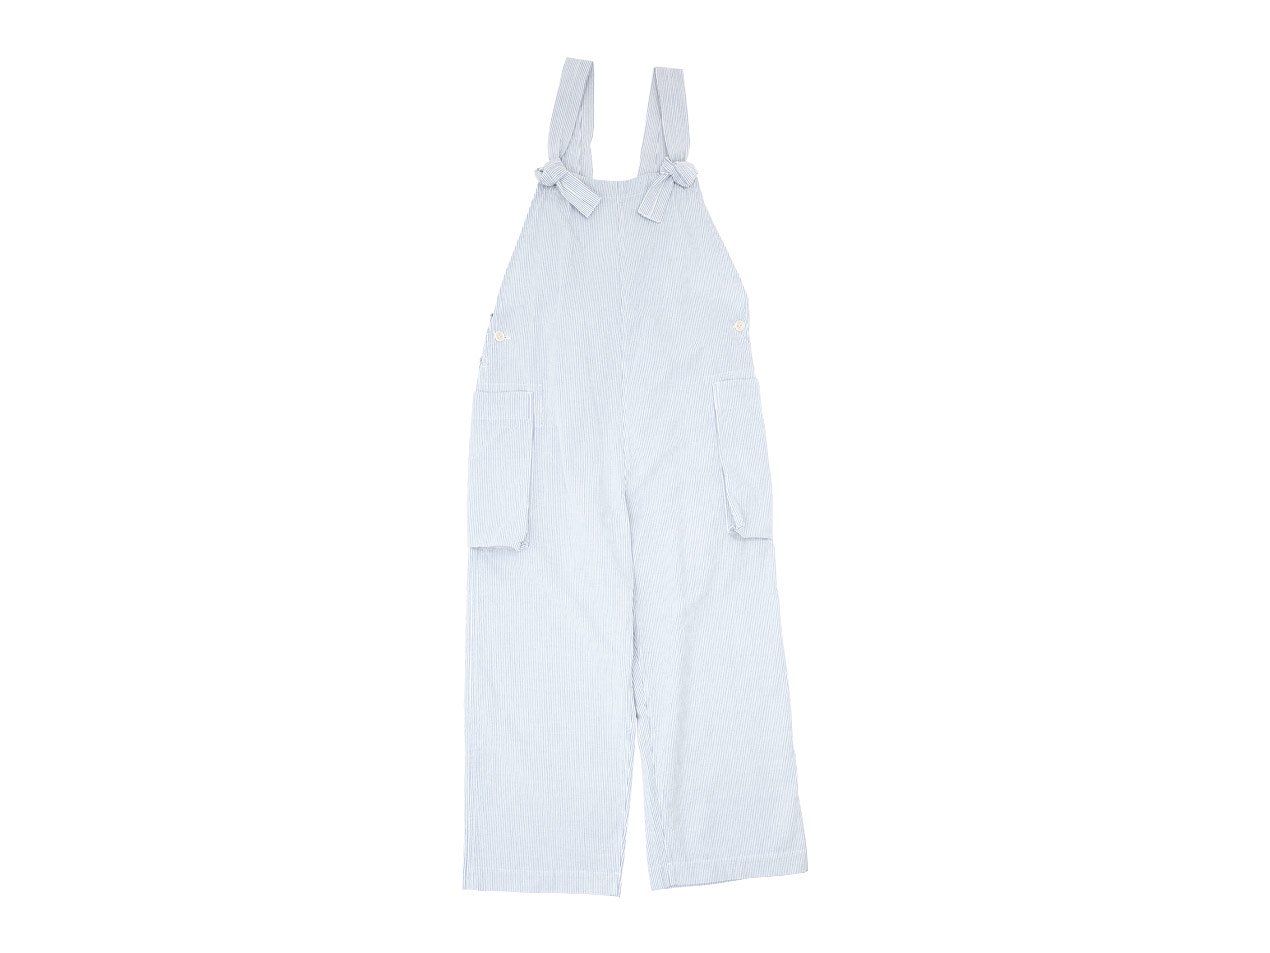 TOUJOURS Classic Overalls HICKORY STRIPE 【KM30DP03】